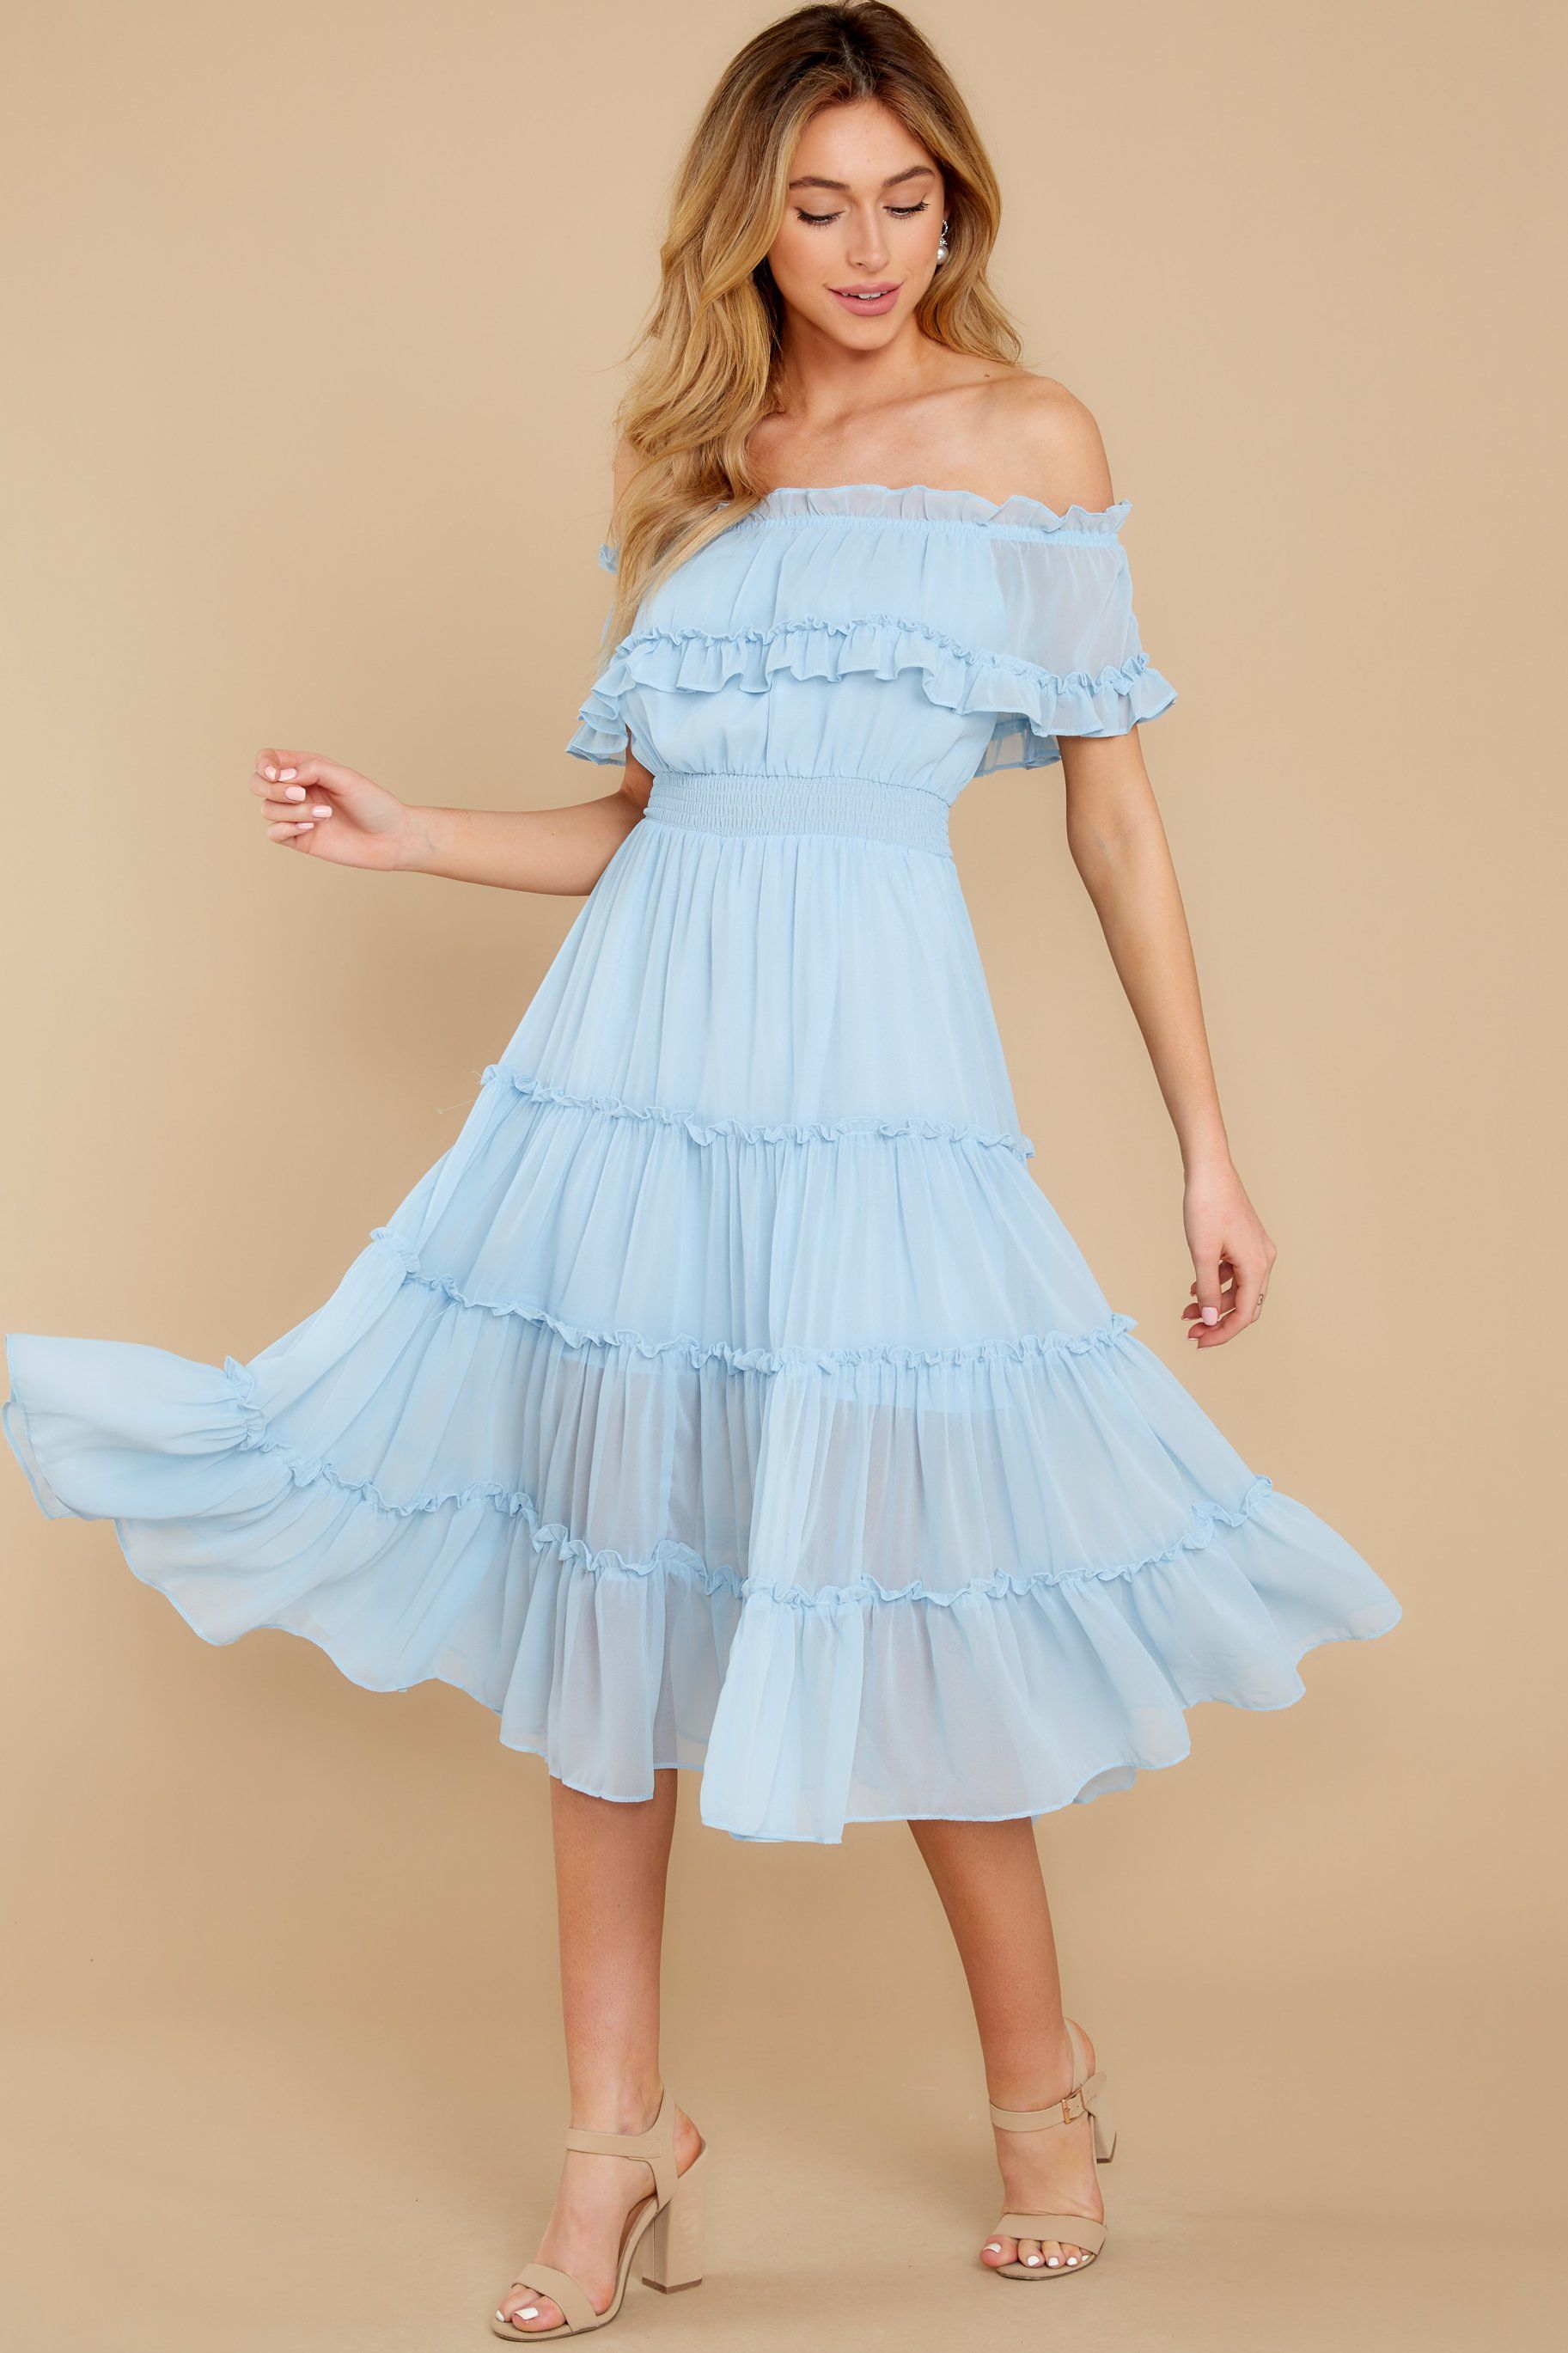 As She Goes Light Blue Off The Shoulder Midi Dress in 2020 | Midi